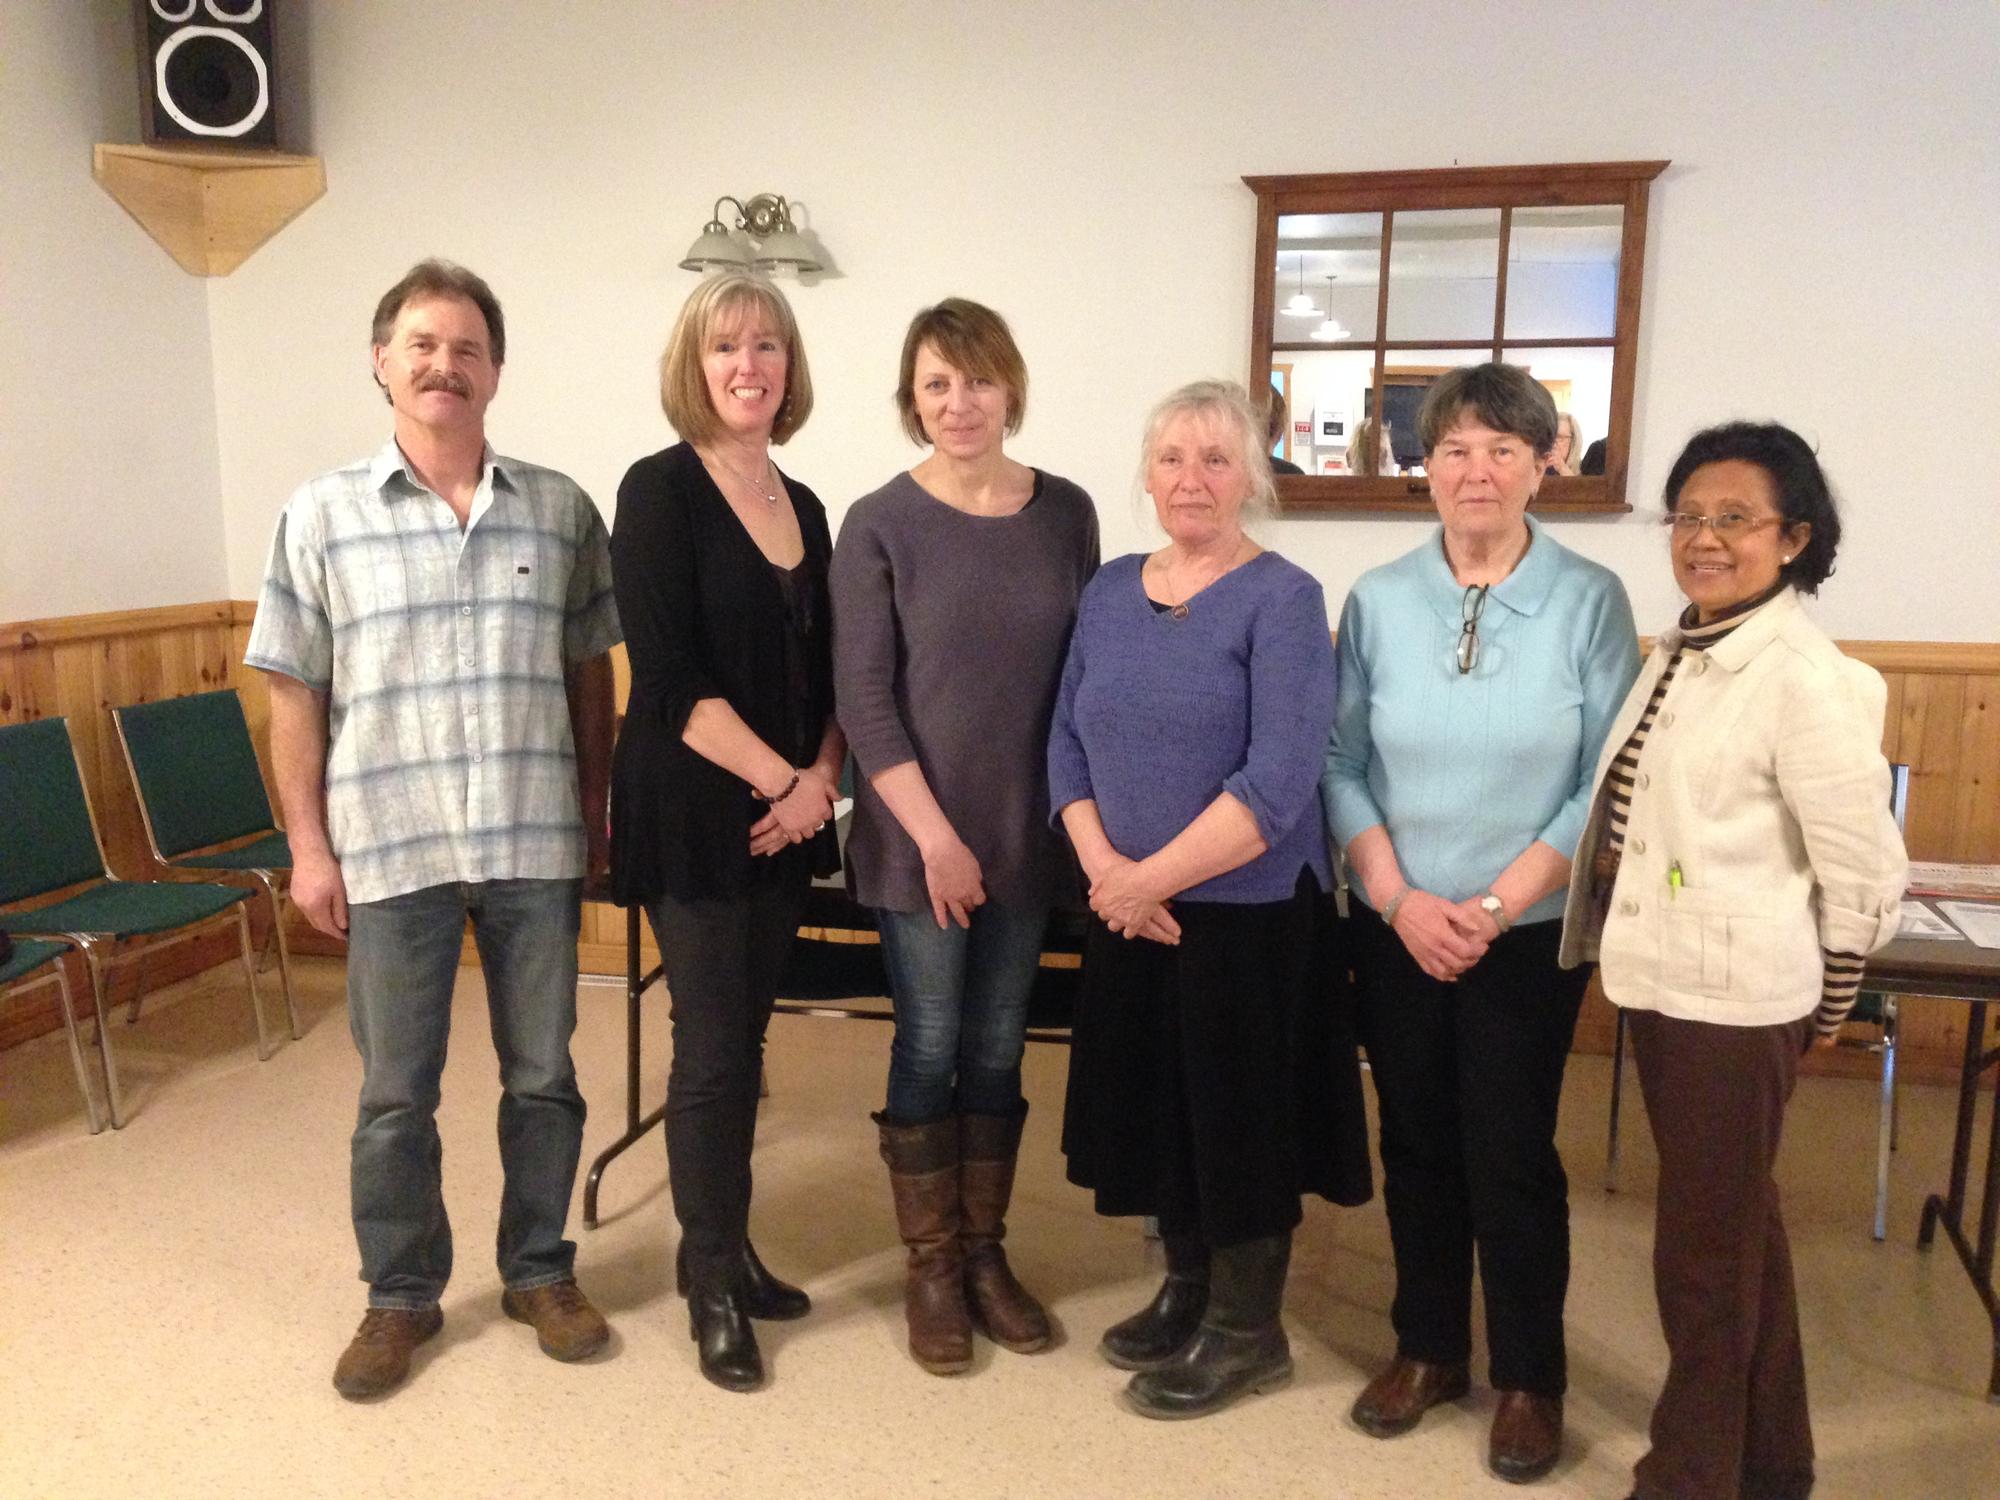 Vankleek Hill Farmers’ Market elects new board of directors for 2018 – 2019